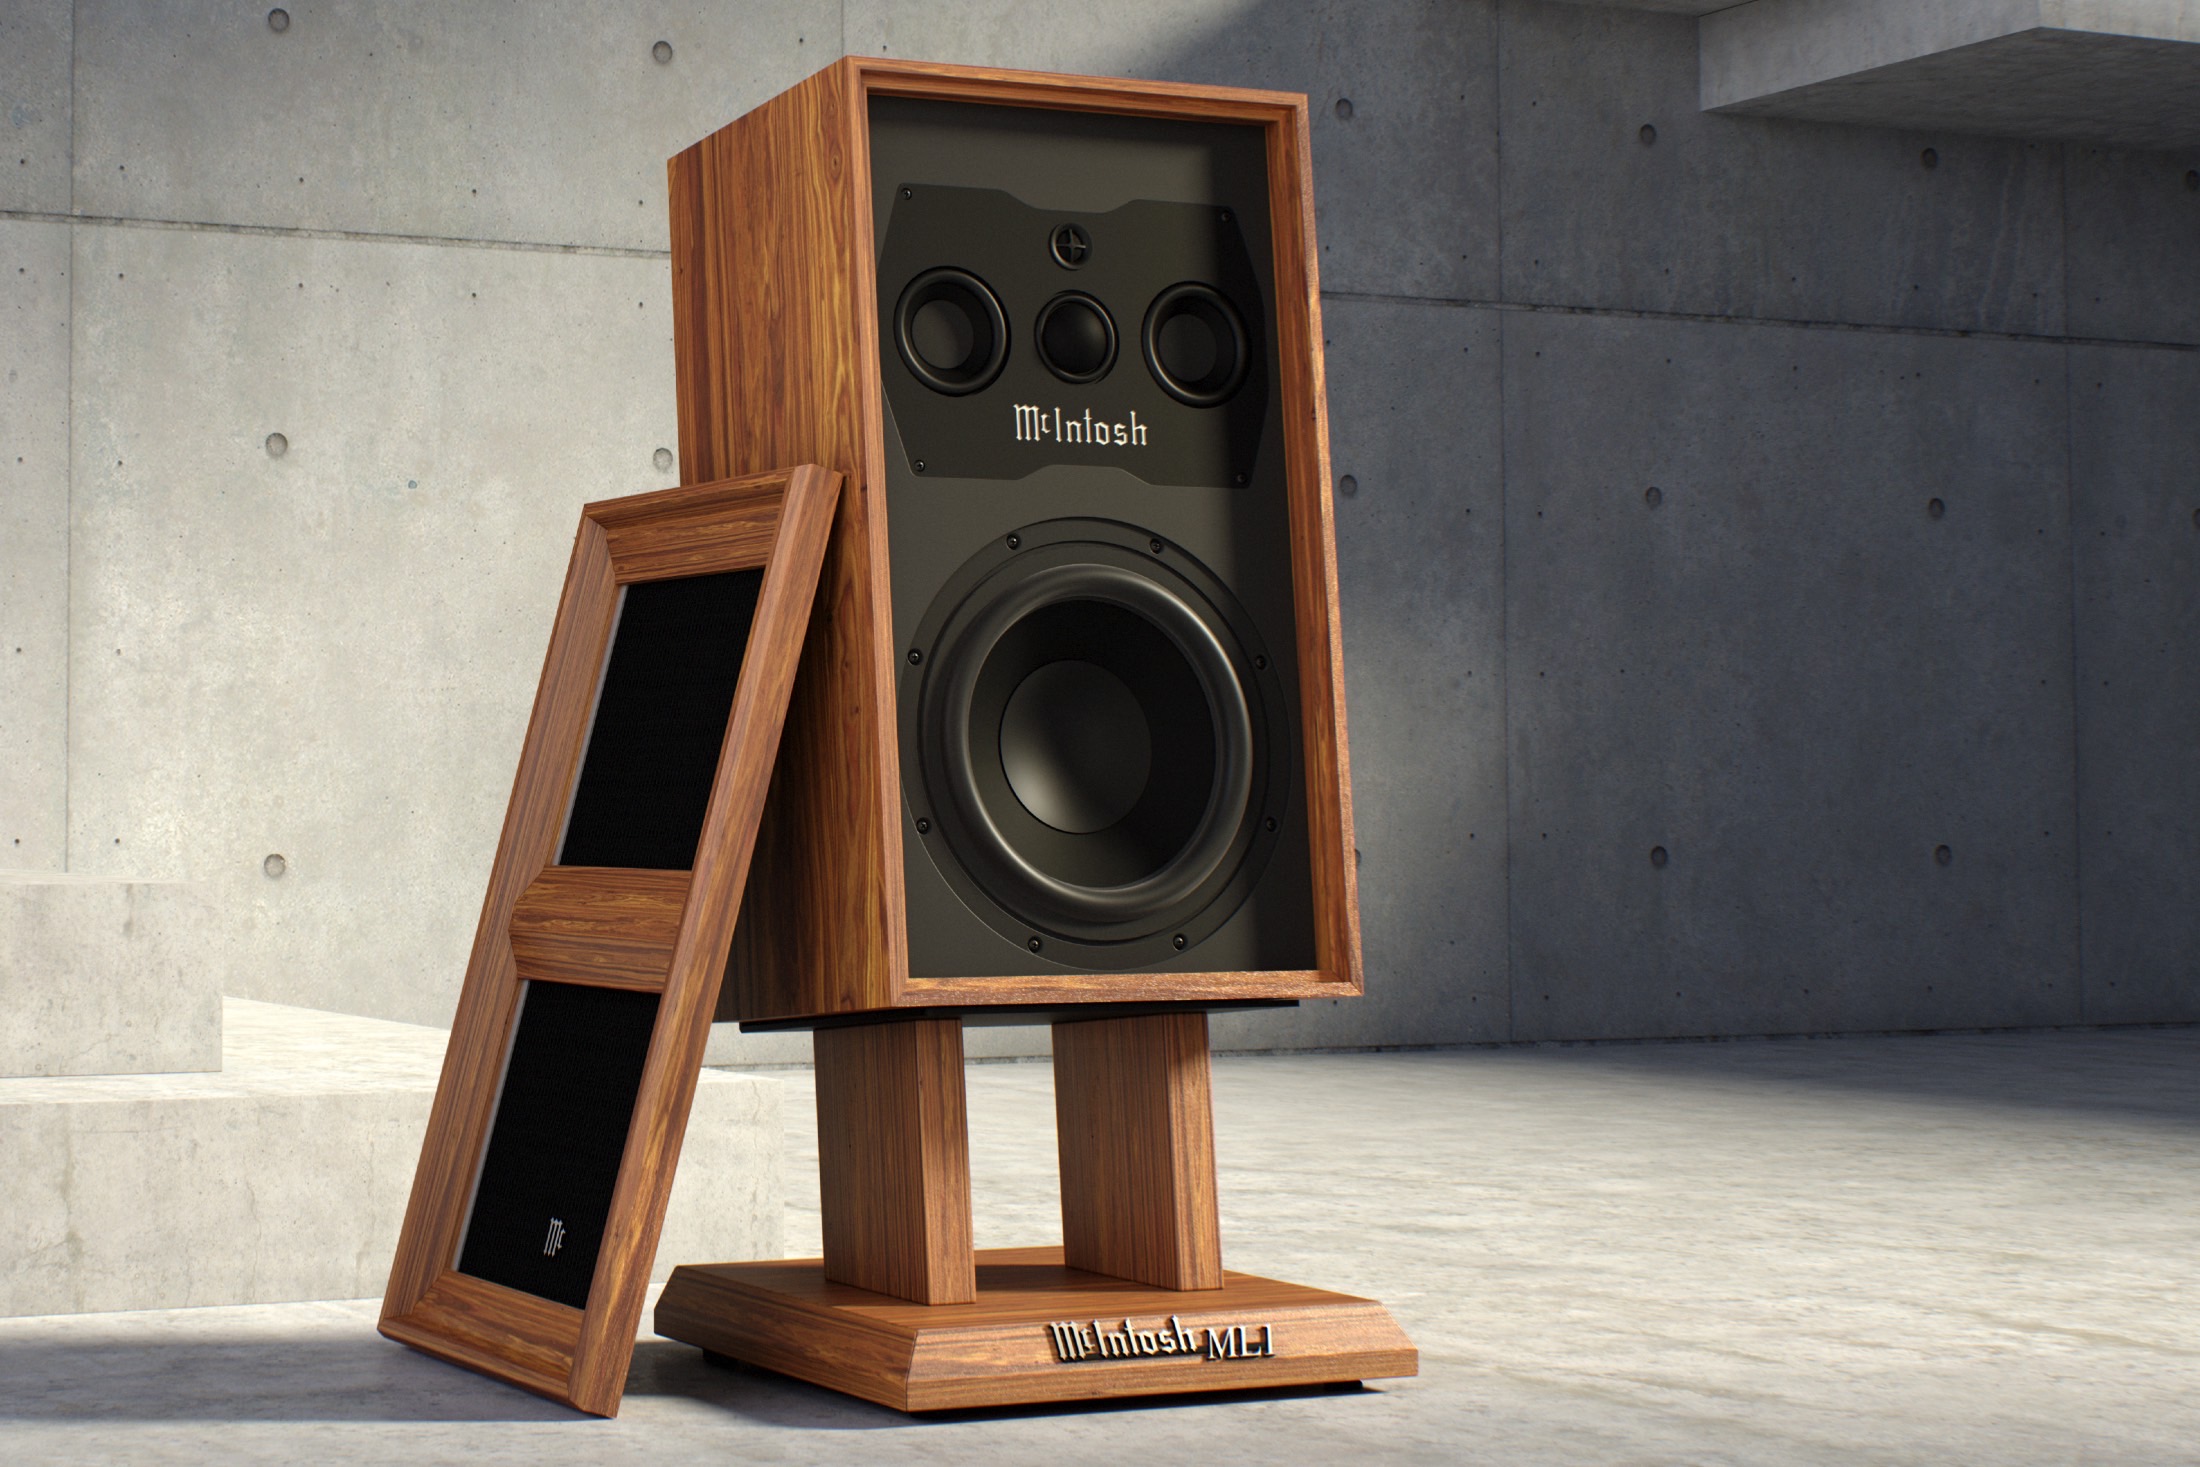 McIntosh’s new $6,000 speaker is a vintage blast from the past